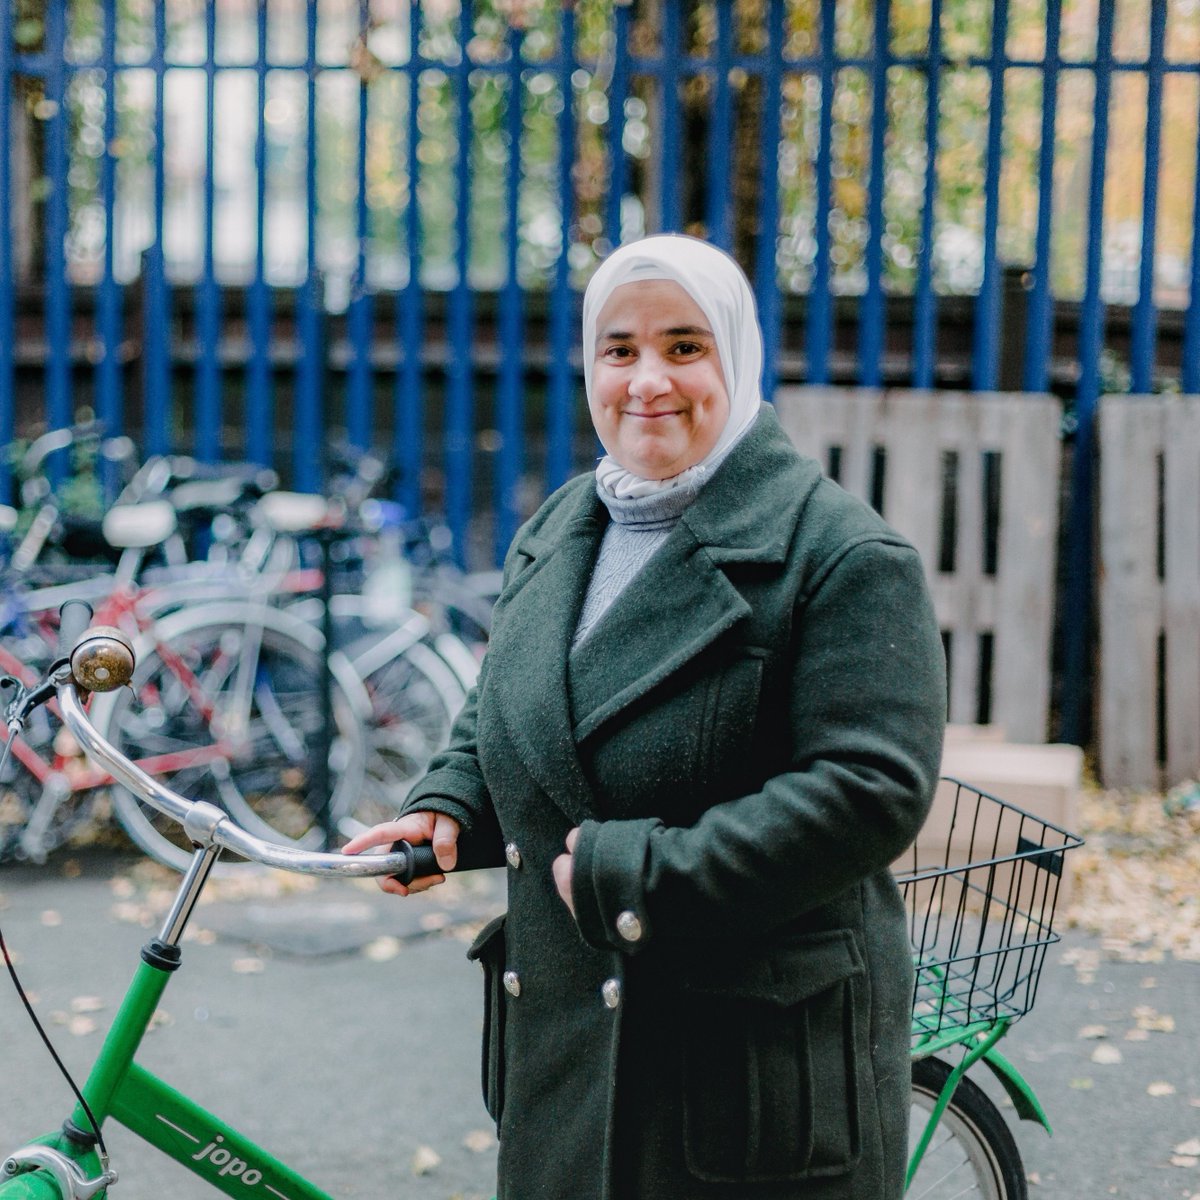 A bike is so much more than just a bike! 🚲 According to our bike recipients: 🧡 89% report improved mental health. 🧡 82% feel more confident and independent. 🧡 82% feel less lonely and isolated. 🧡 92% experience improved physical health.